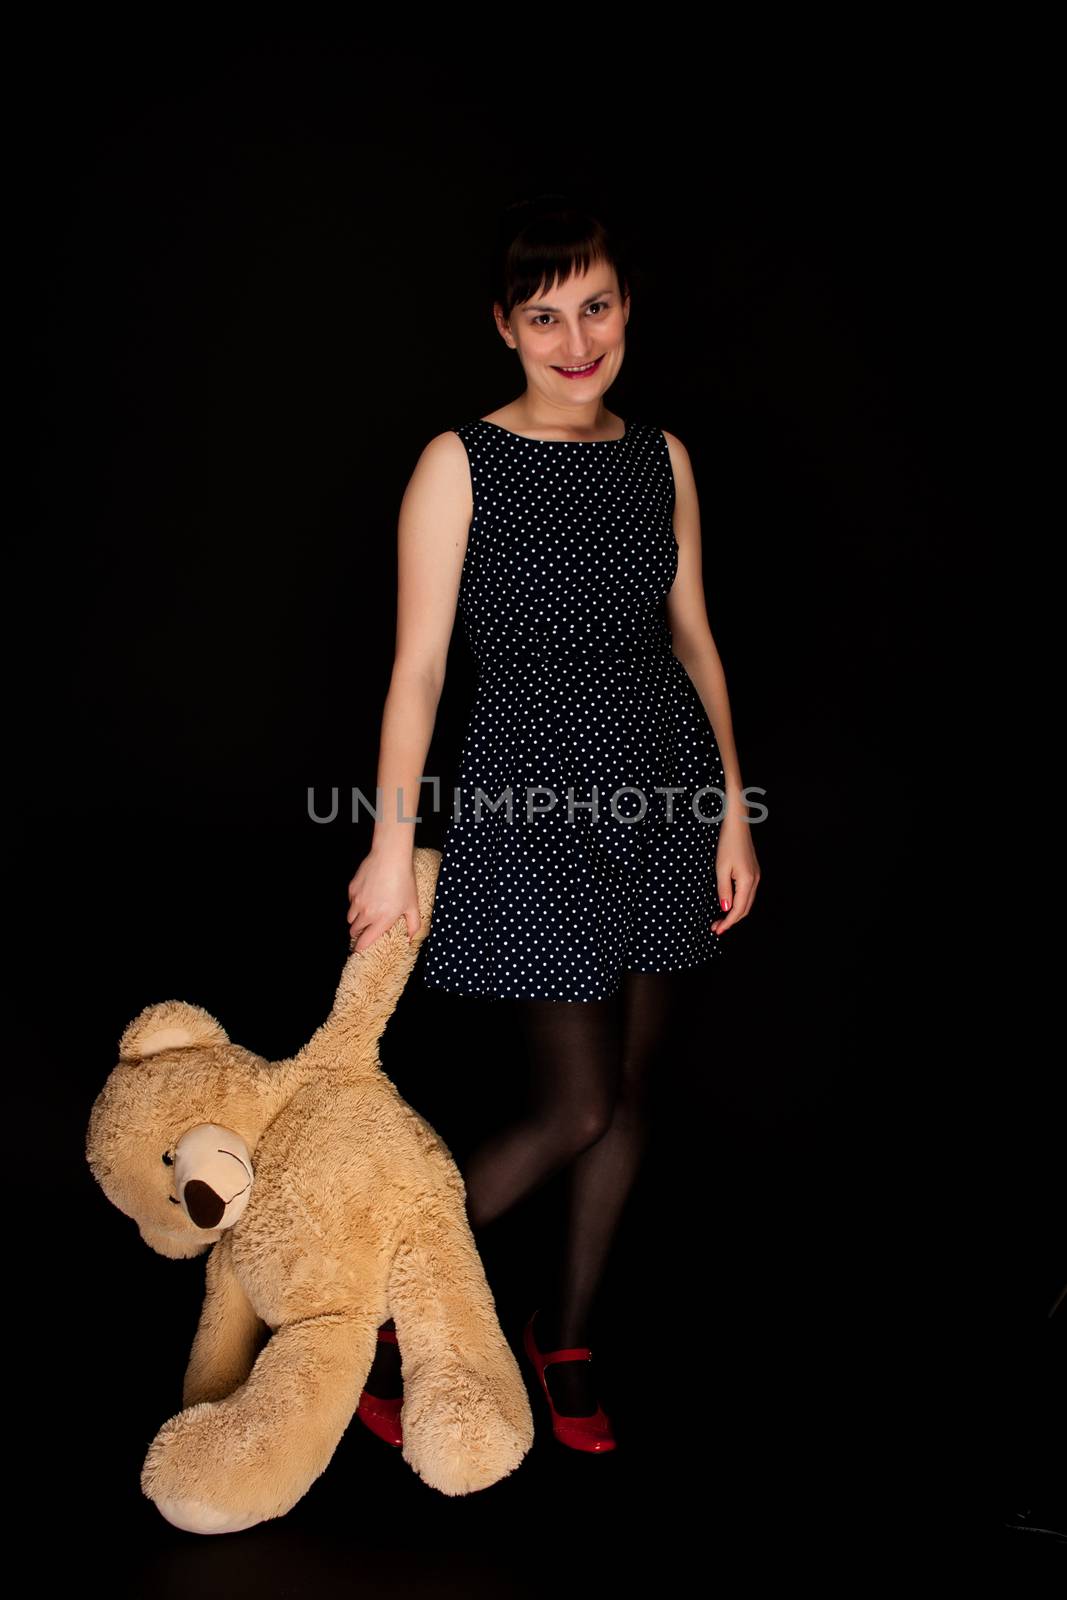 stylish expressive woman with red shoes on black background with teddy bear